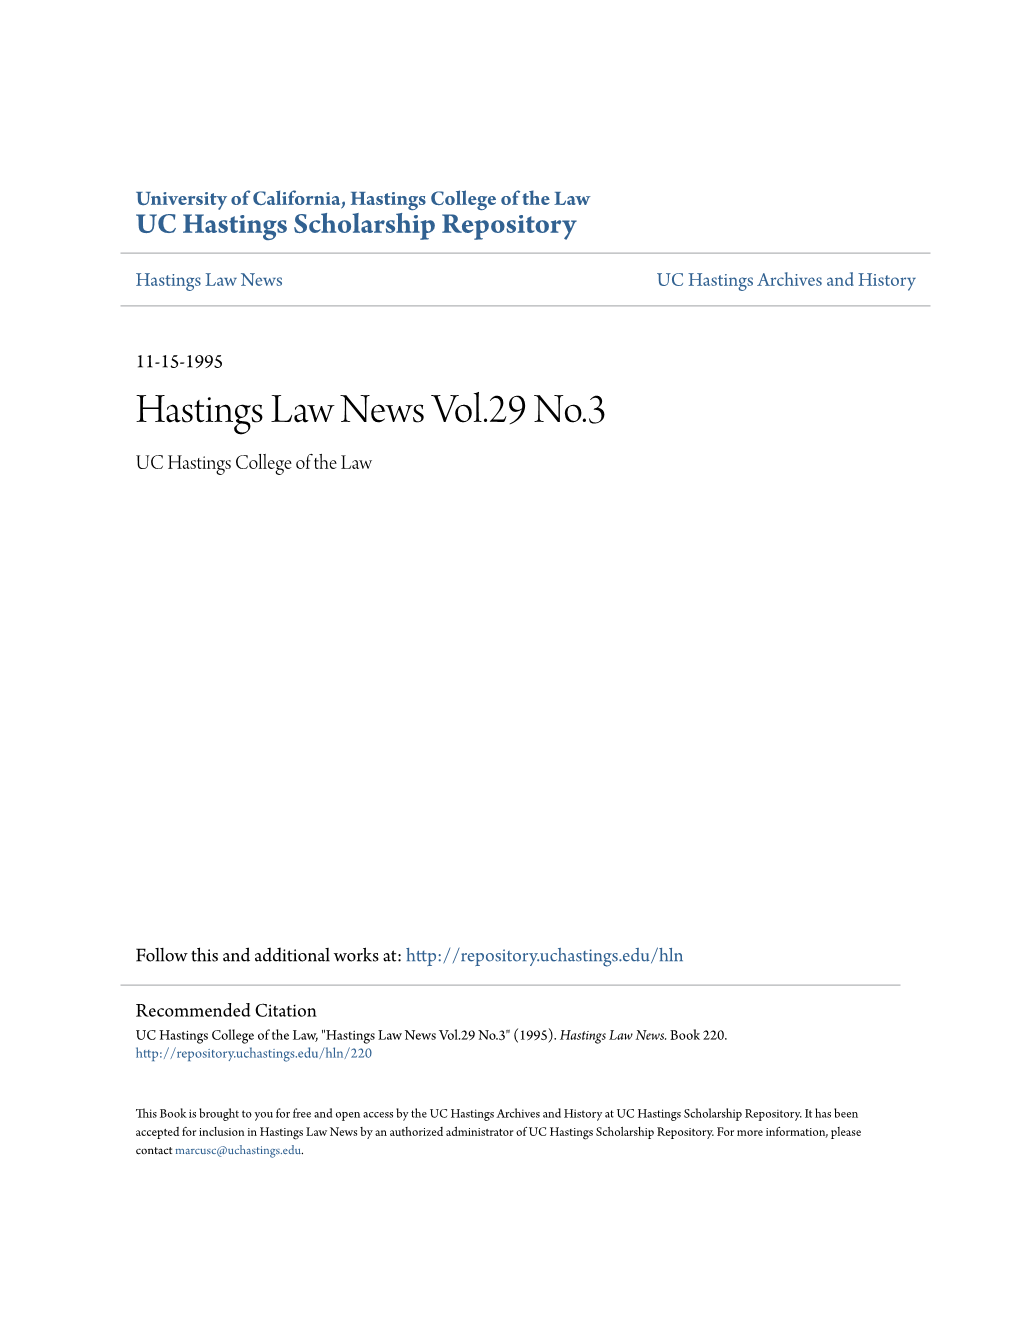 Hastings Law News Vol.29 No.3 UC Hastings College of the Law